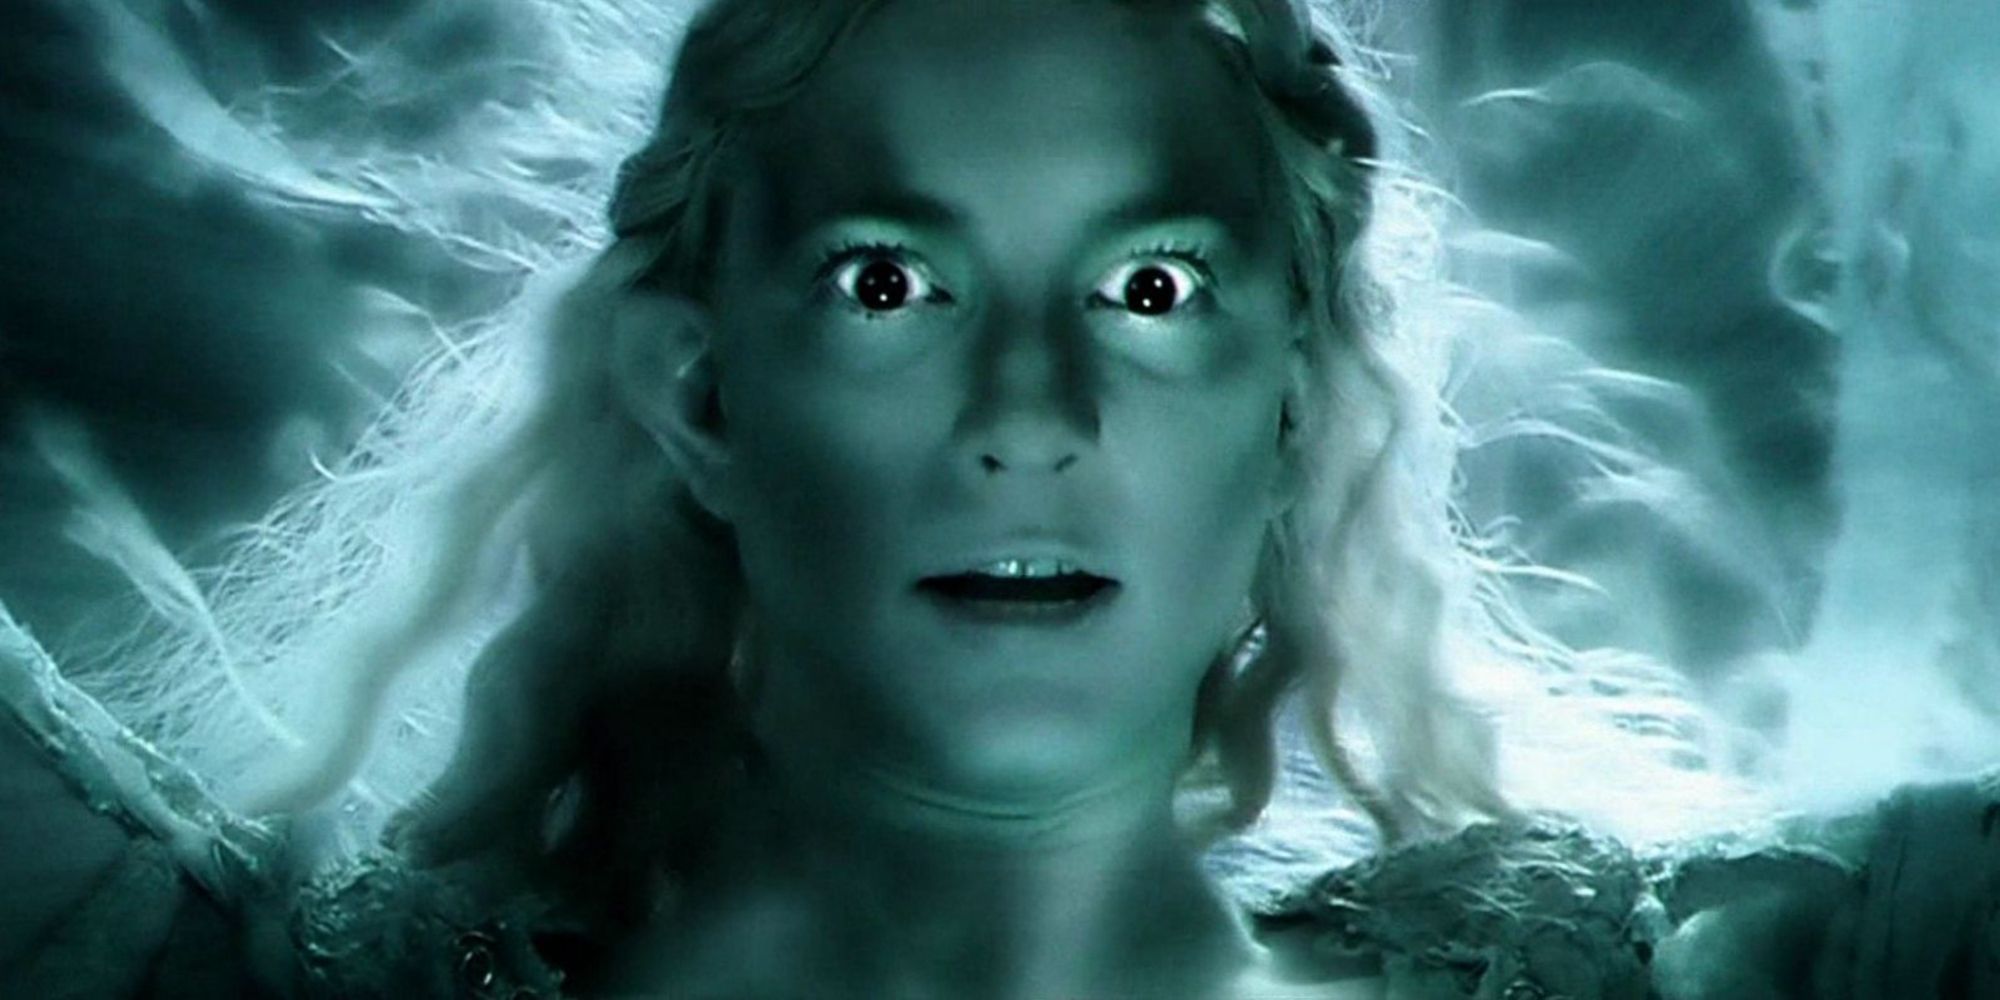 Galadriel as she's offered the one ring in Lord of the Rings.